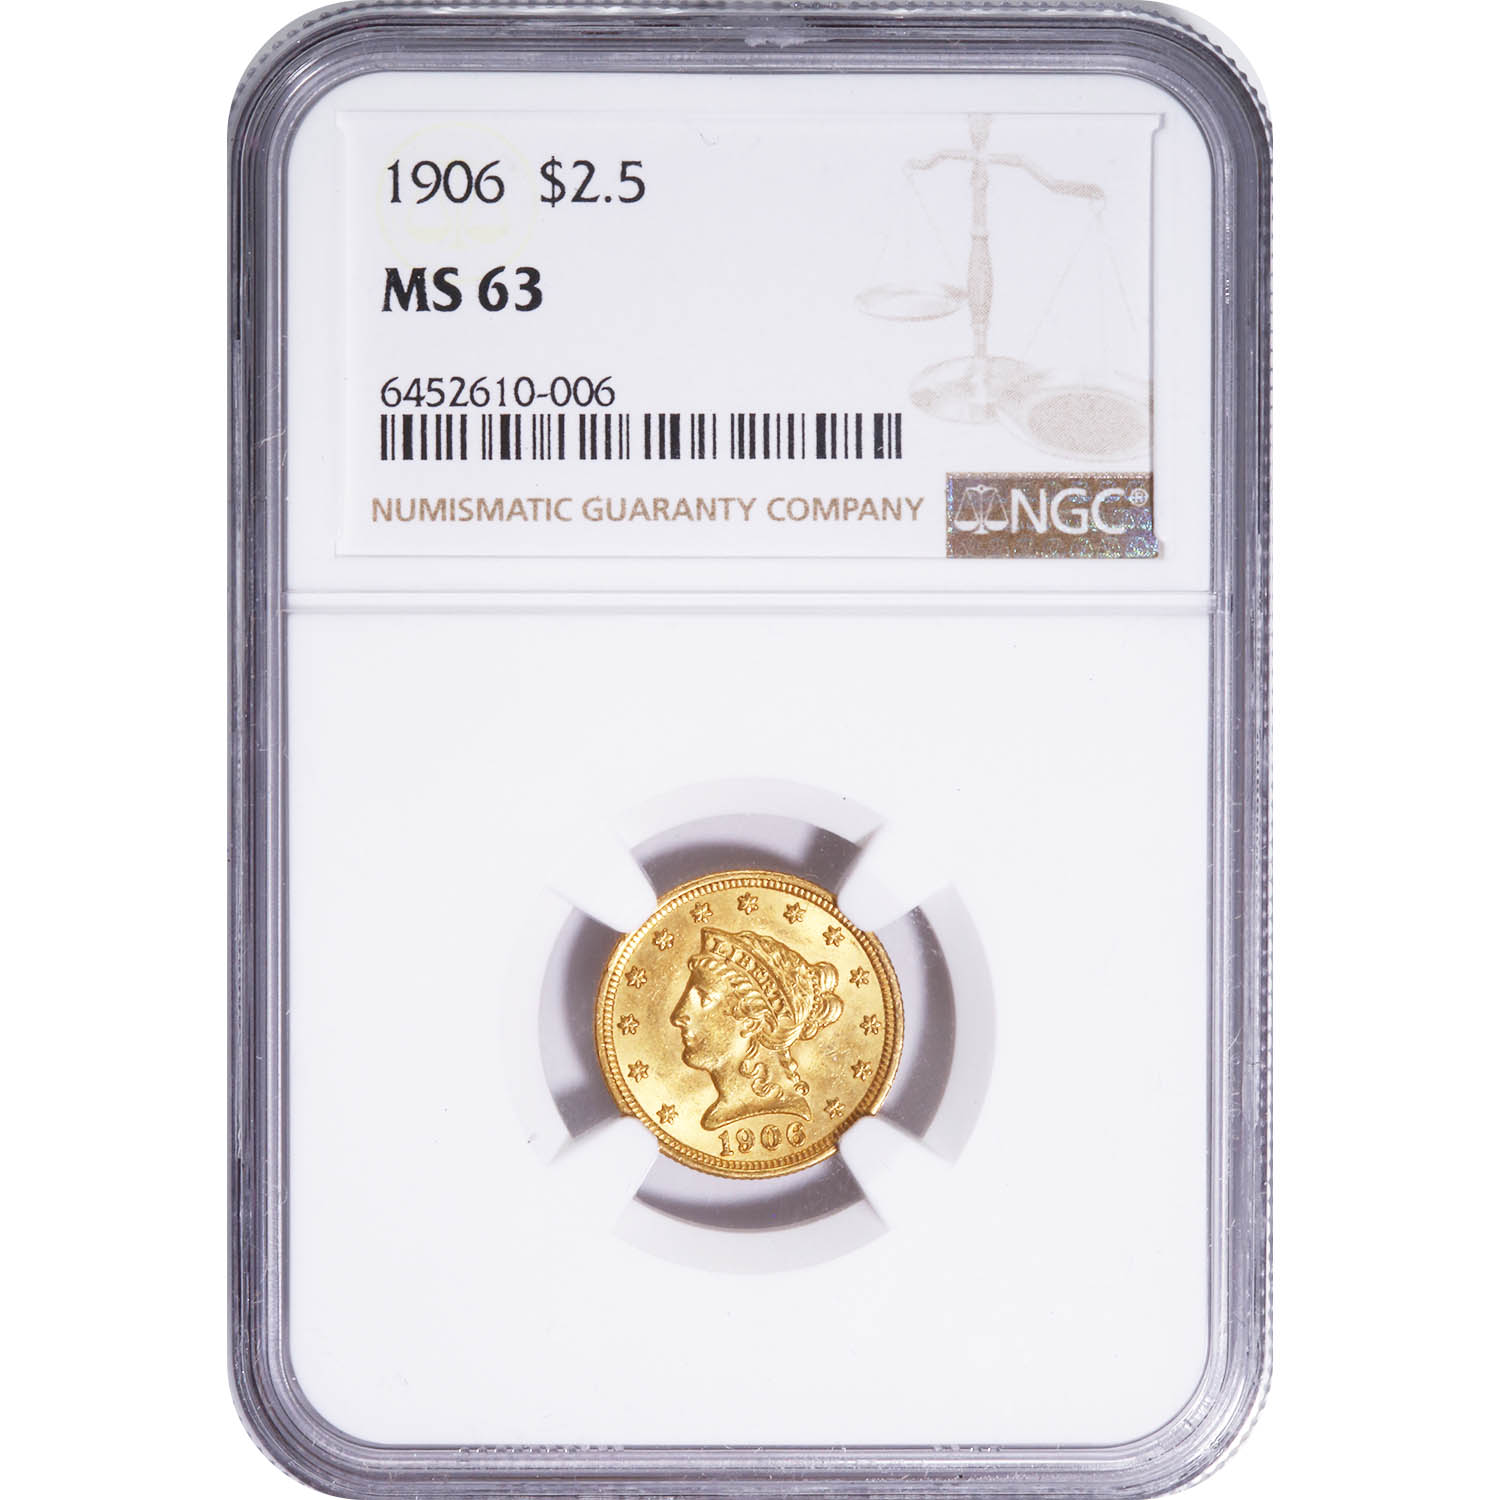 Certified US Gold $2.5 Liberty 1906 MS63 NGC